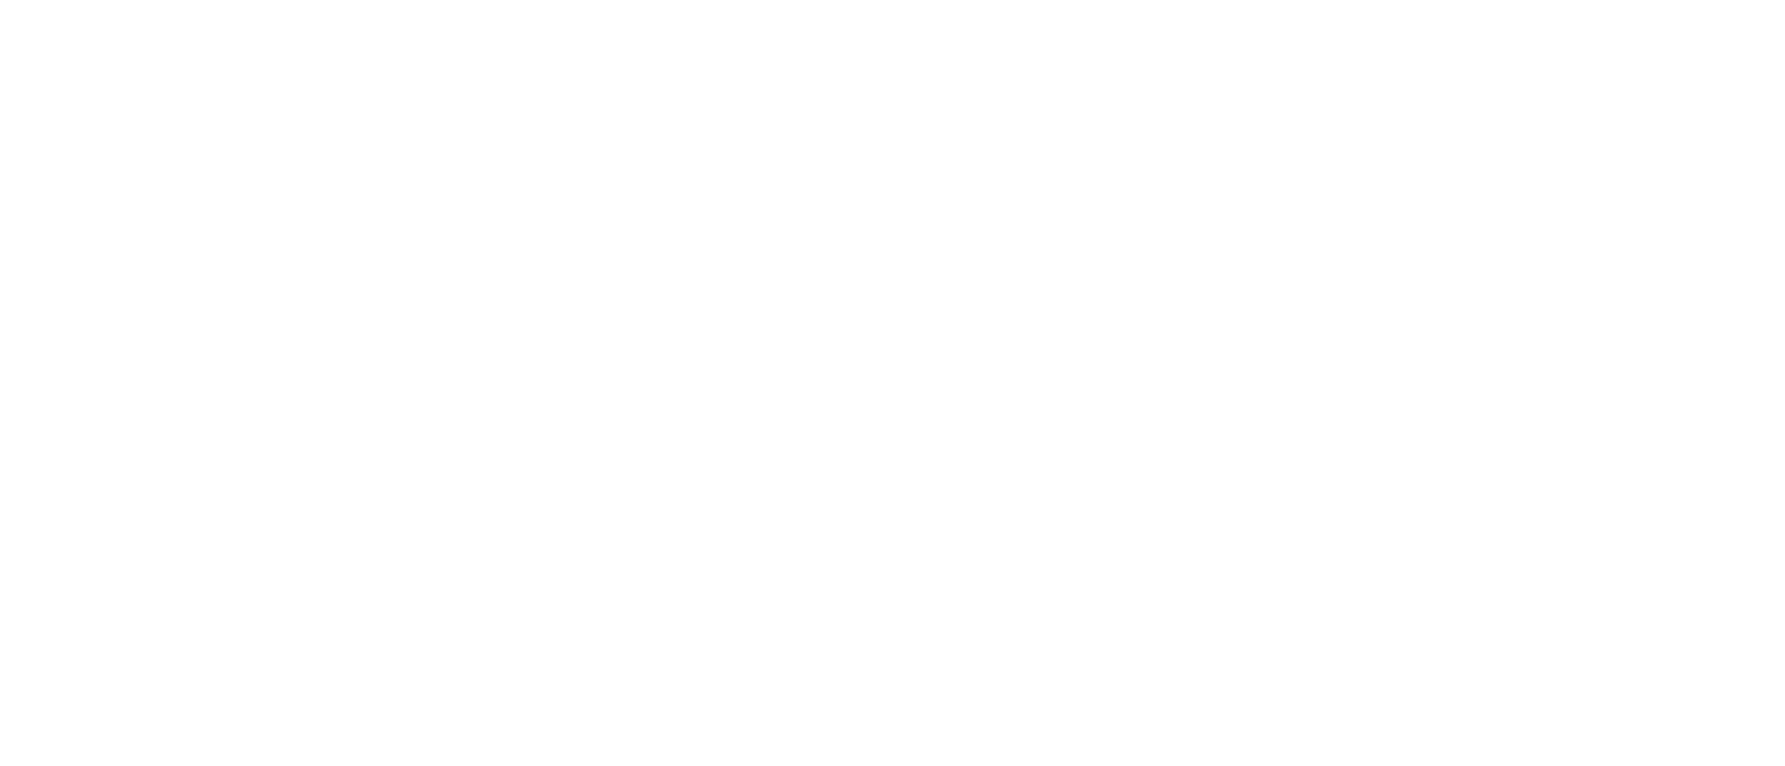 Hearts in the Game logo